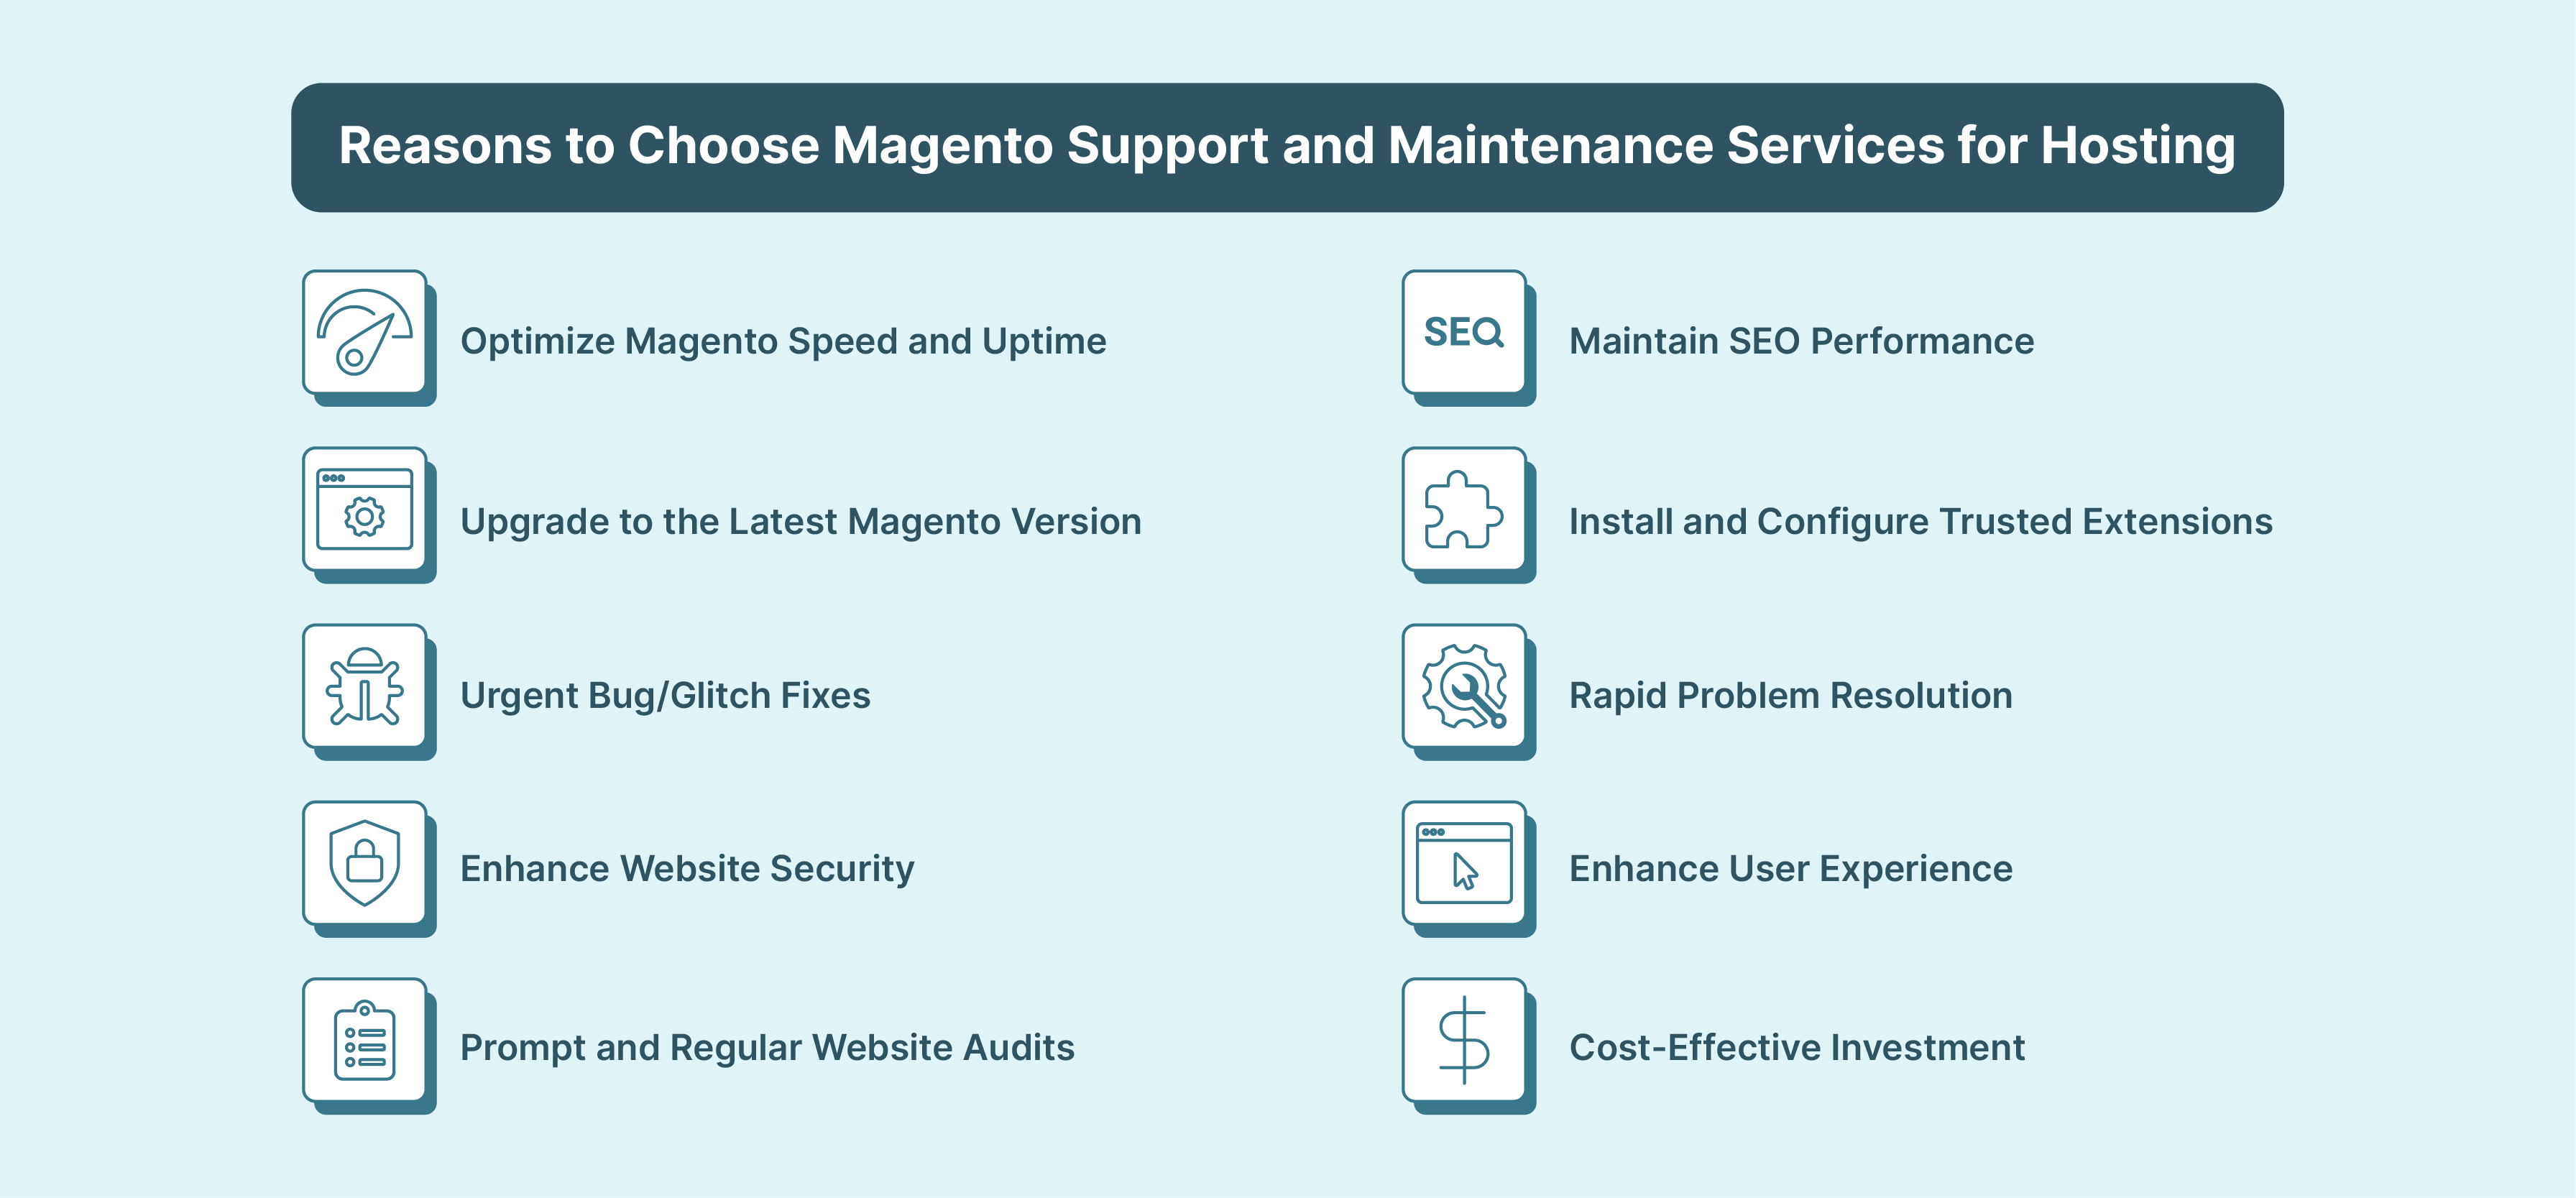 Top 10 Reasons to Choose Magento Support and Maintenance Services